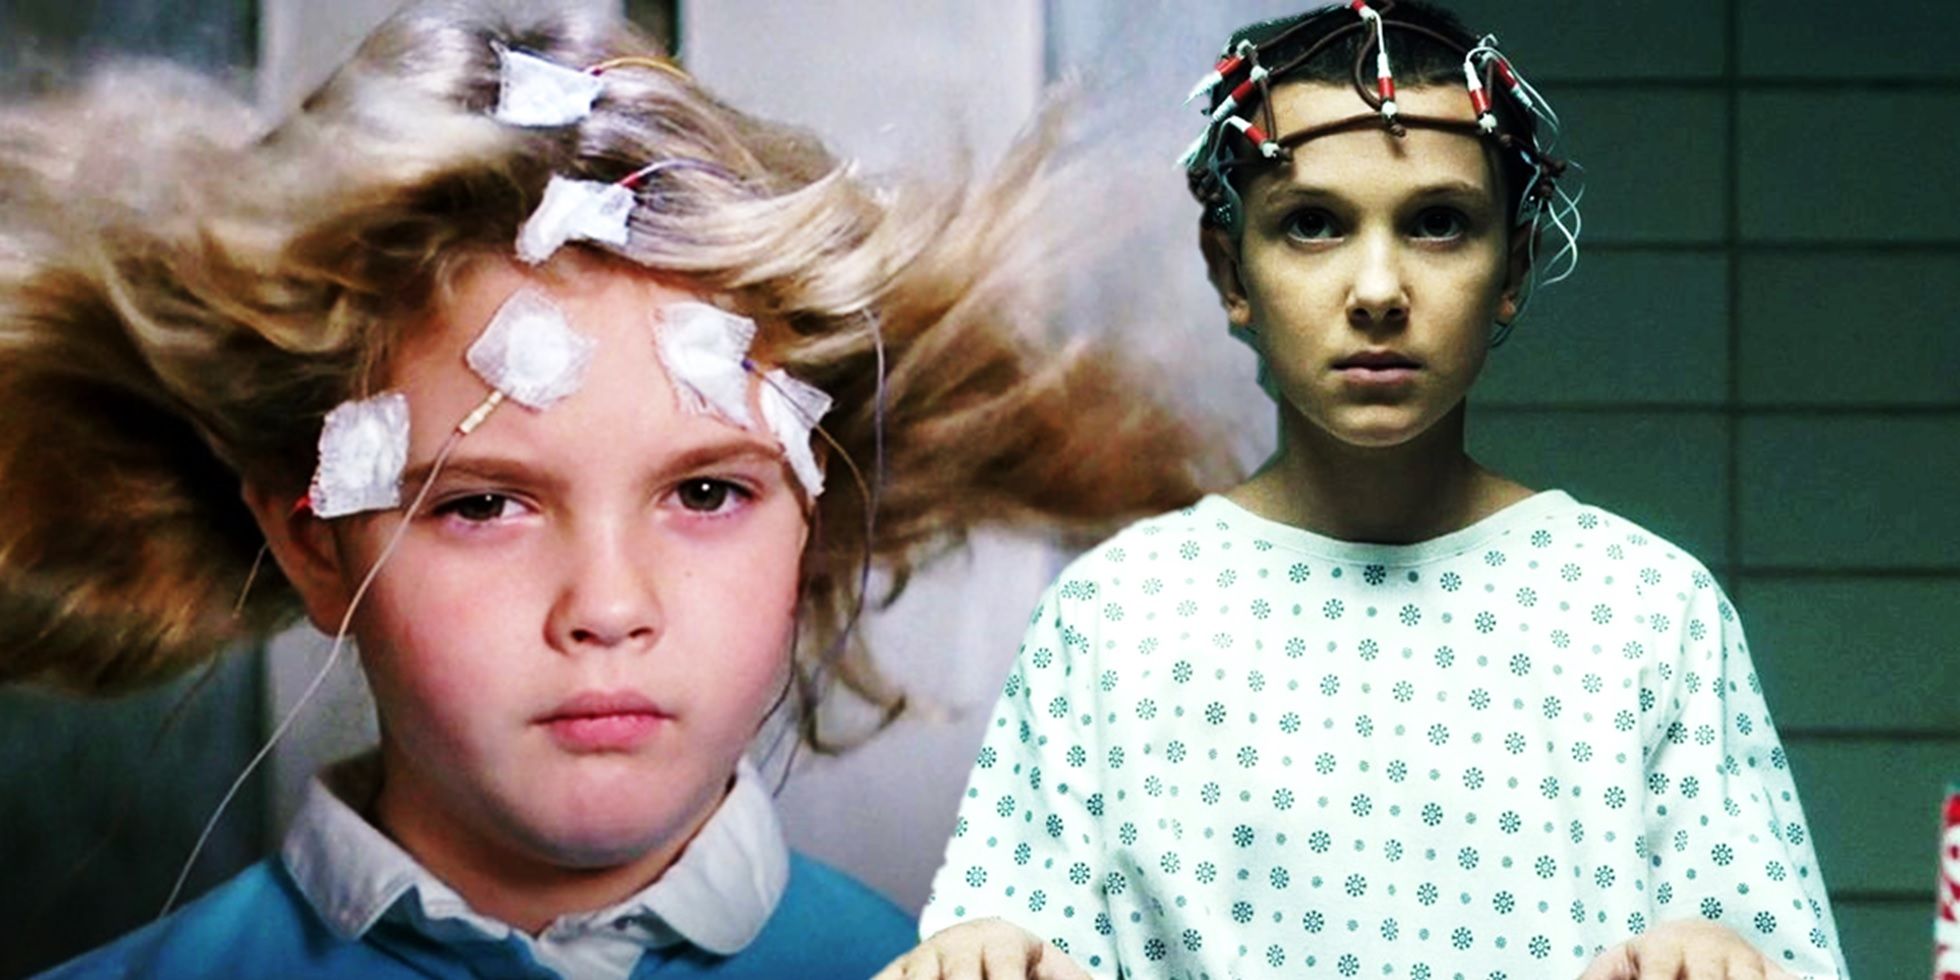 Collage of Drew Barrymore in Firestarter and Millie Bobby Brown in Stranger Things